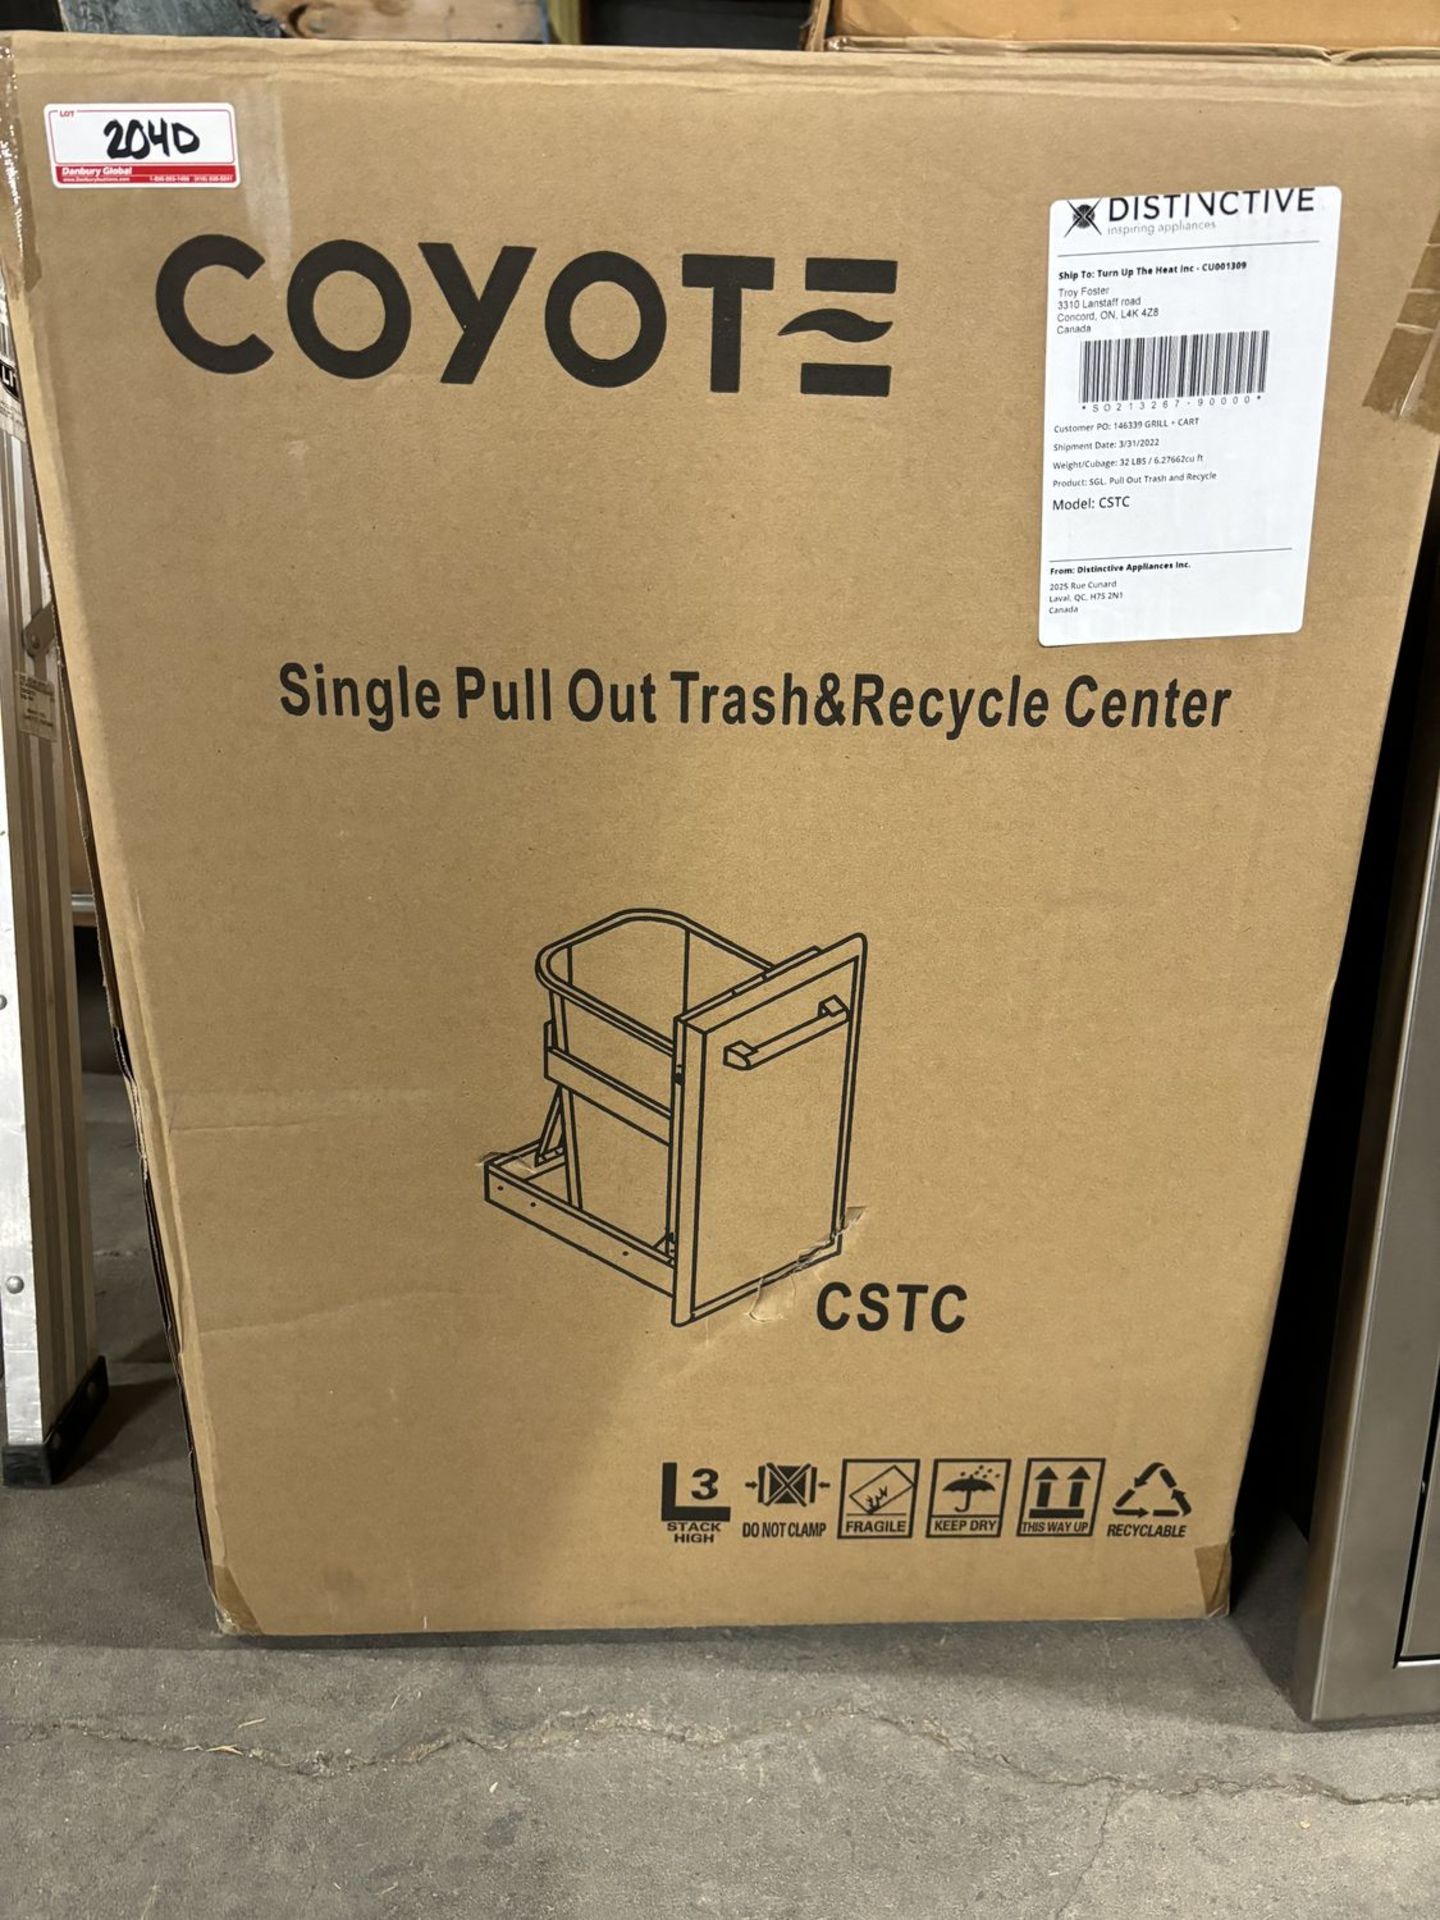 COYOTE SINGLE PULL OUT TRASH & RECYCLE CENTER (RETAIL $949.99)